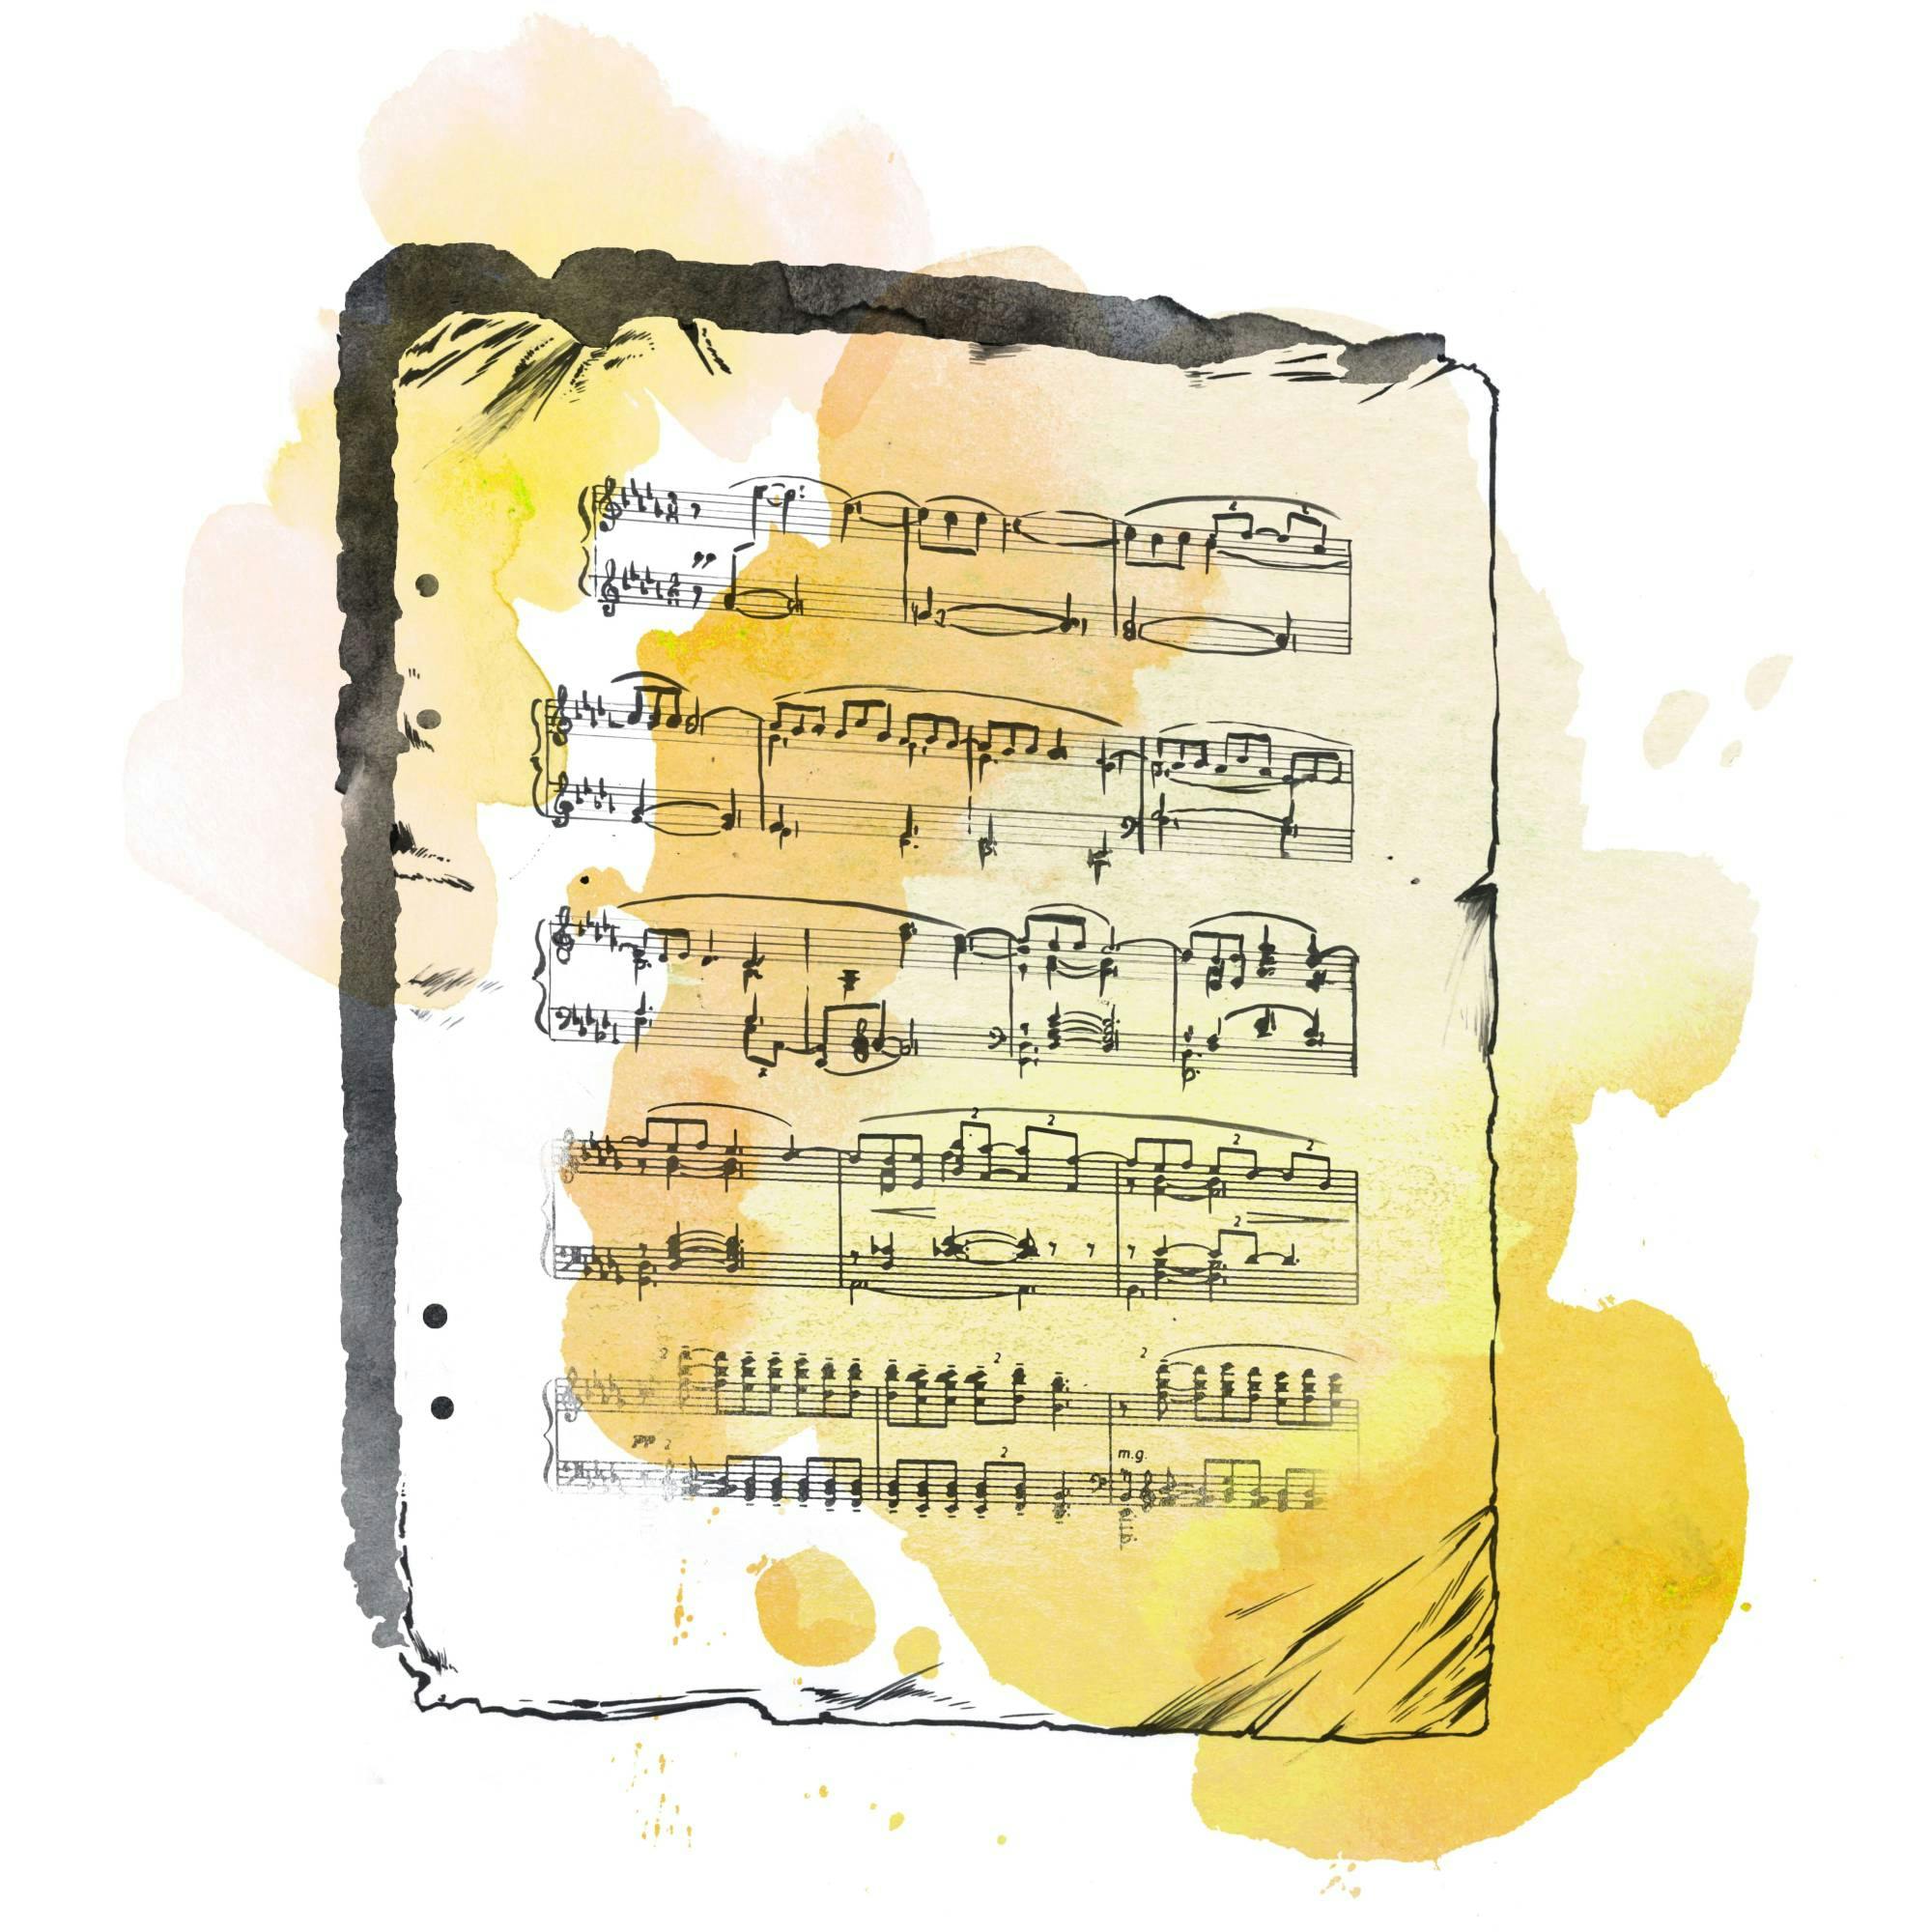 Watercolor illustration of the sheet music for “Claire de Lune.” Overrated or underrated?